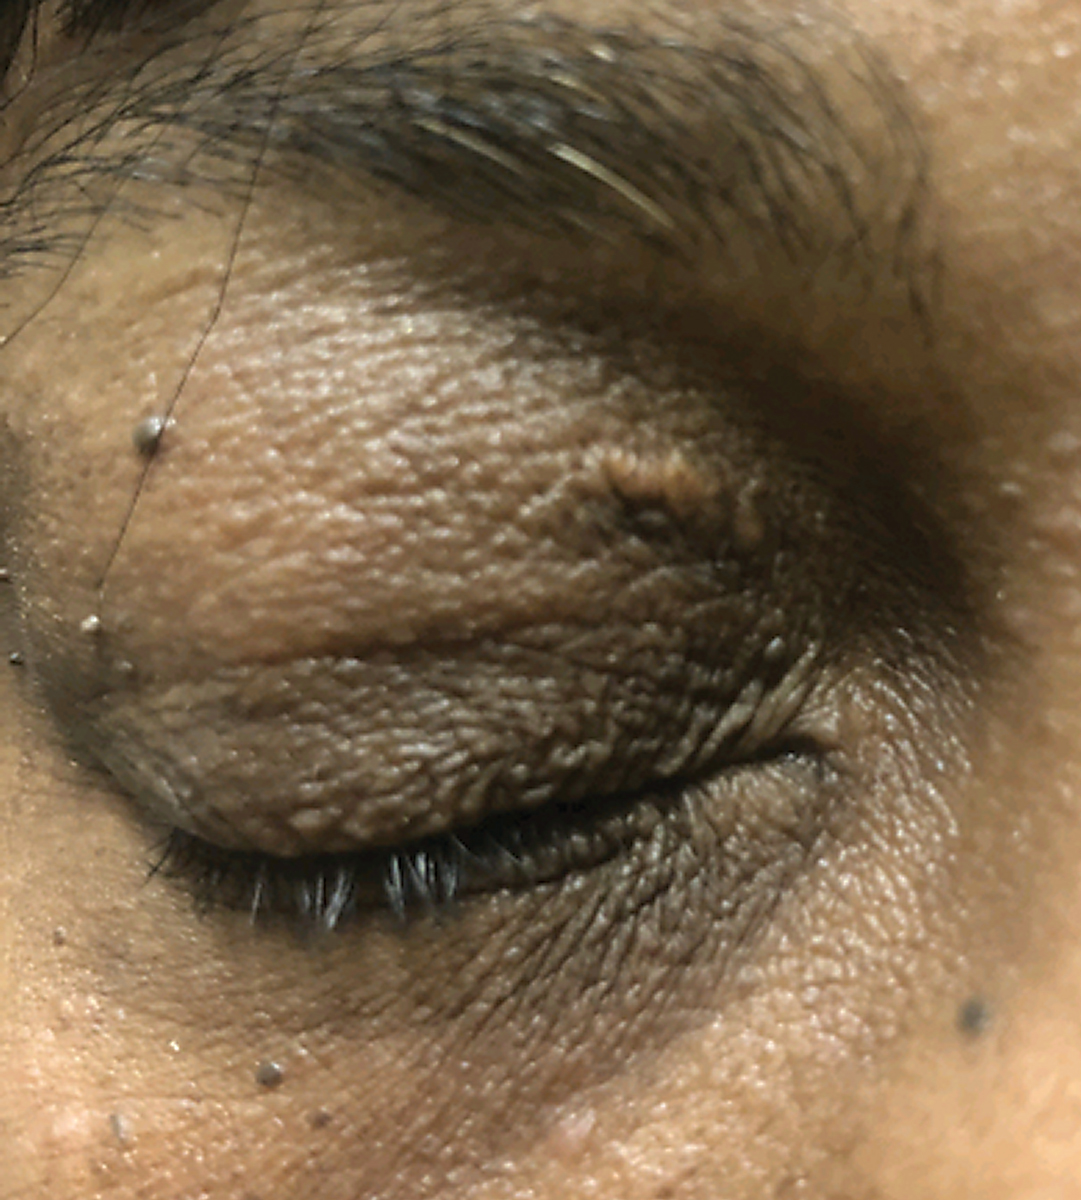 An example of periocular skin findings similar to those of the patient in question.